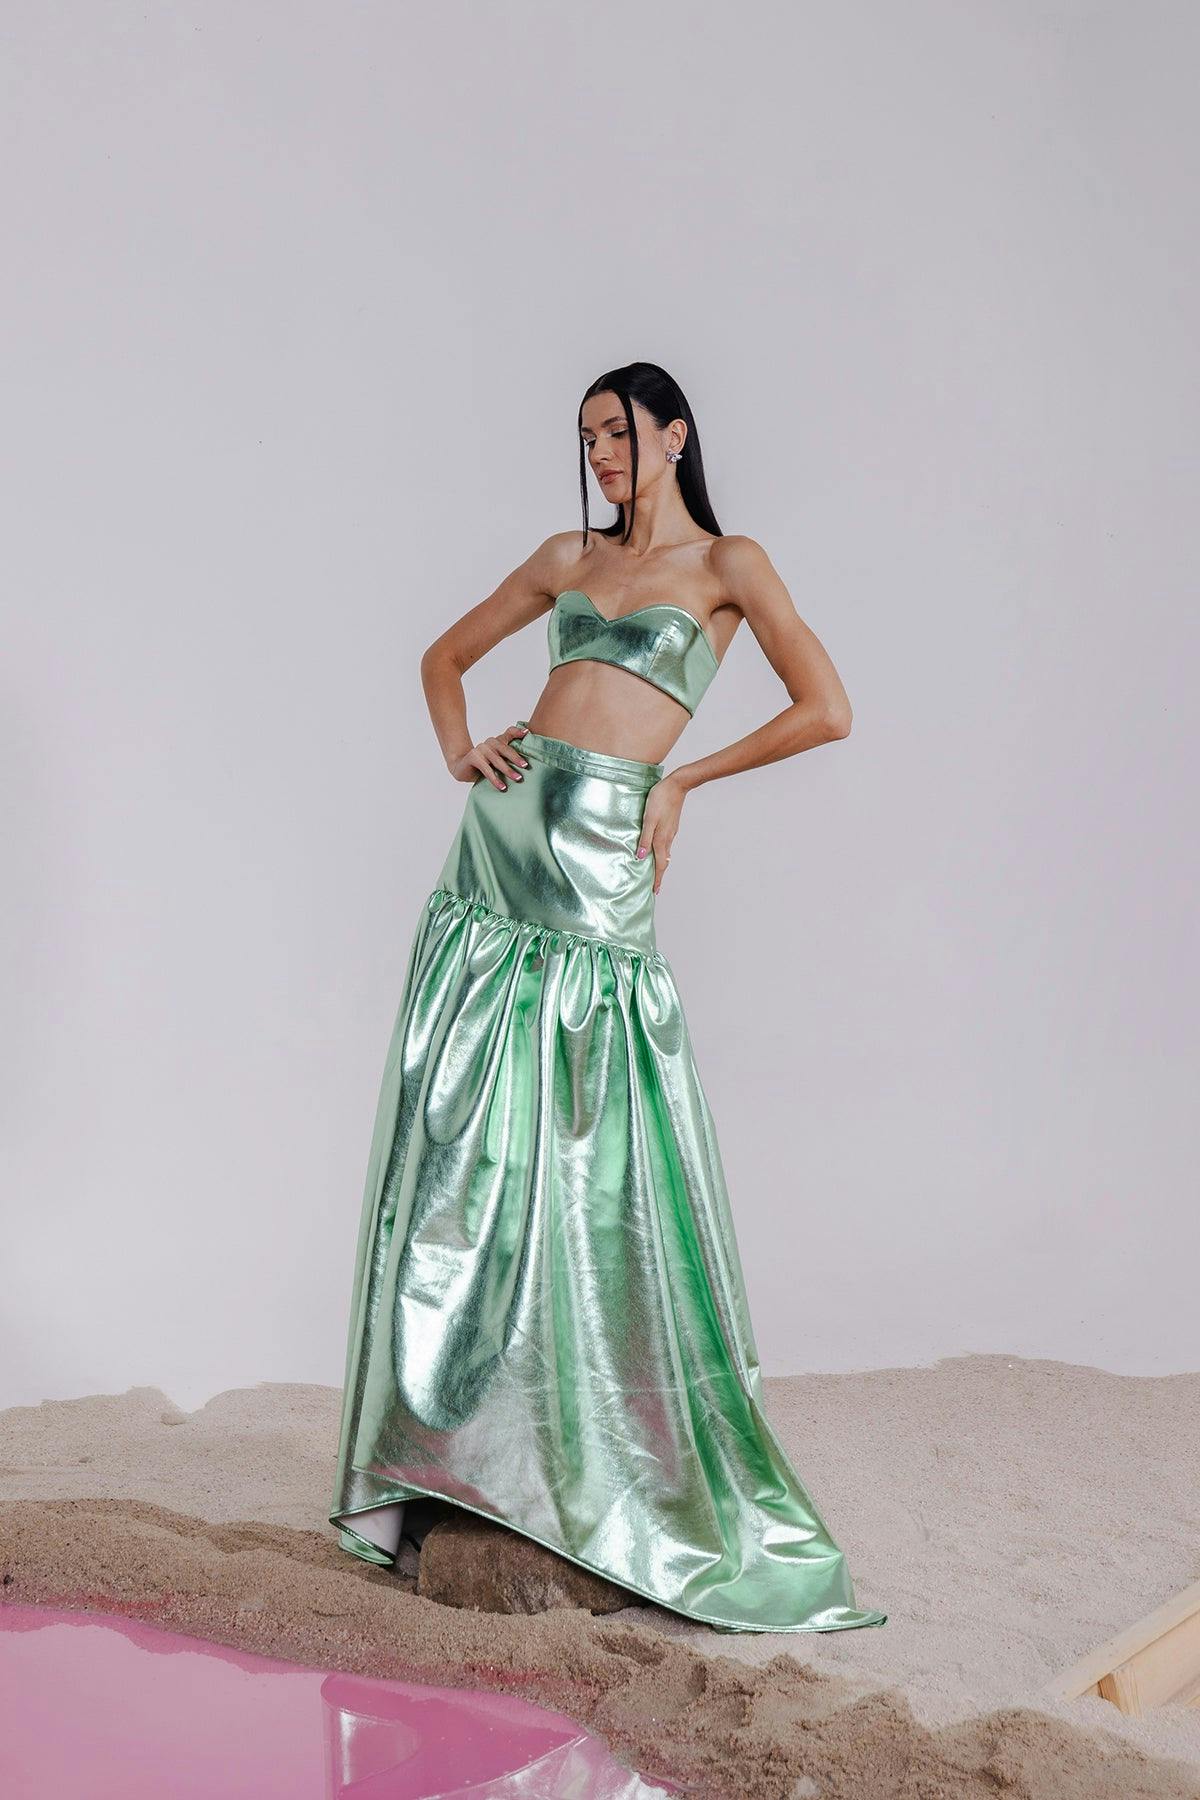 NAIA GREEN METALLIC BRALETTE & LONG SKIRT, a product by July Issue